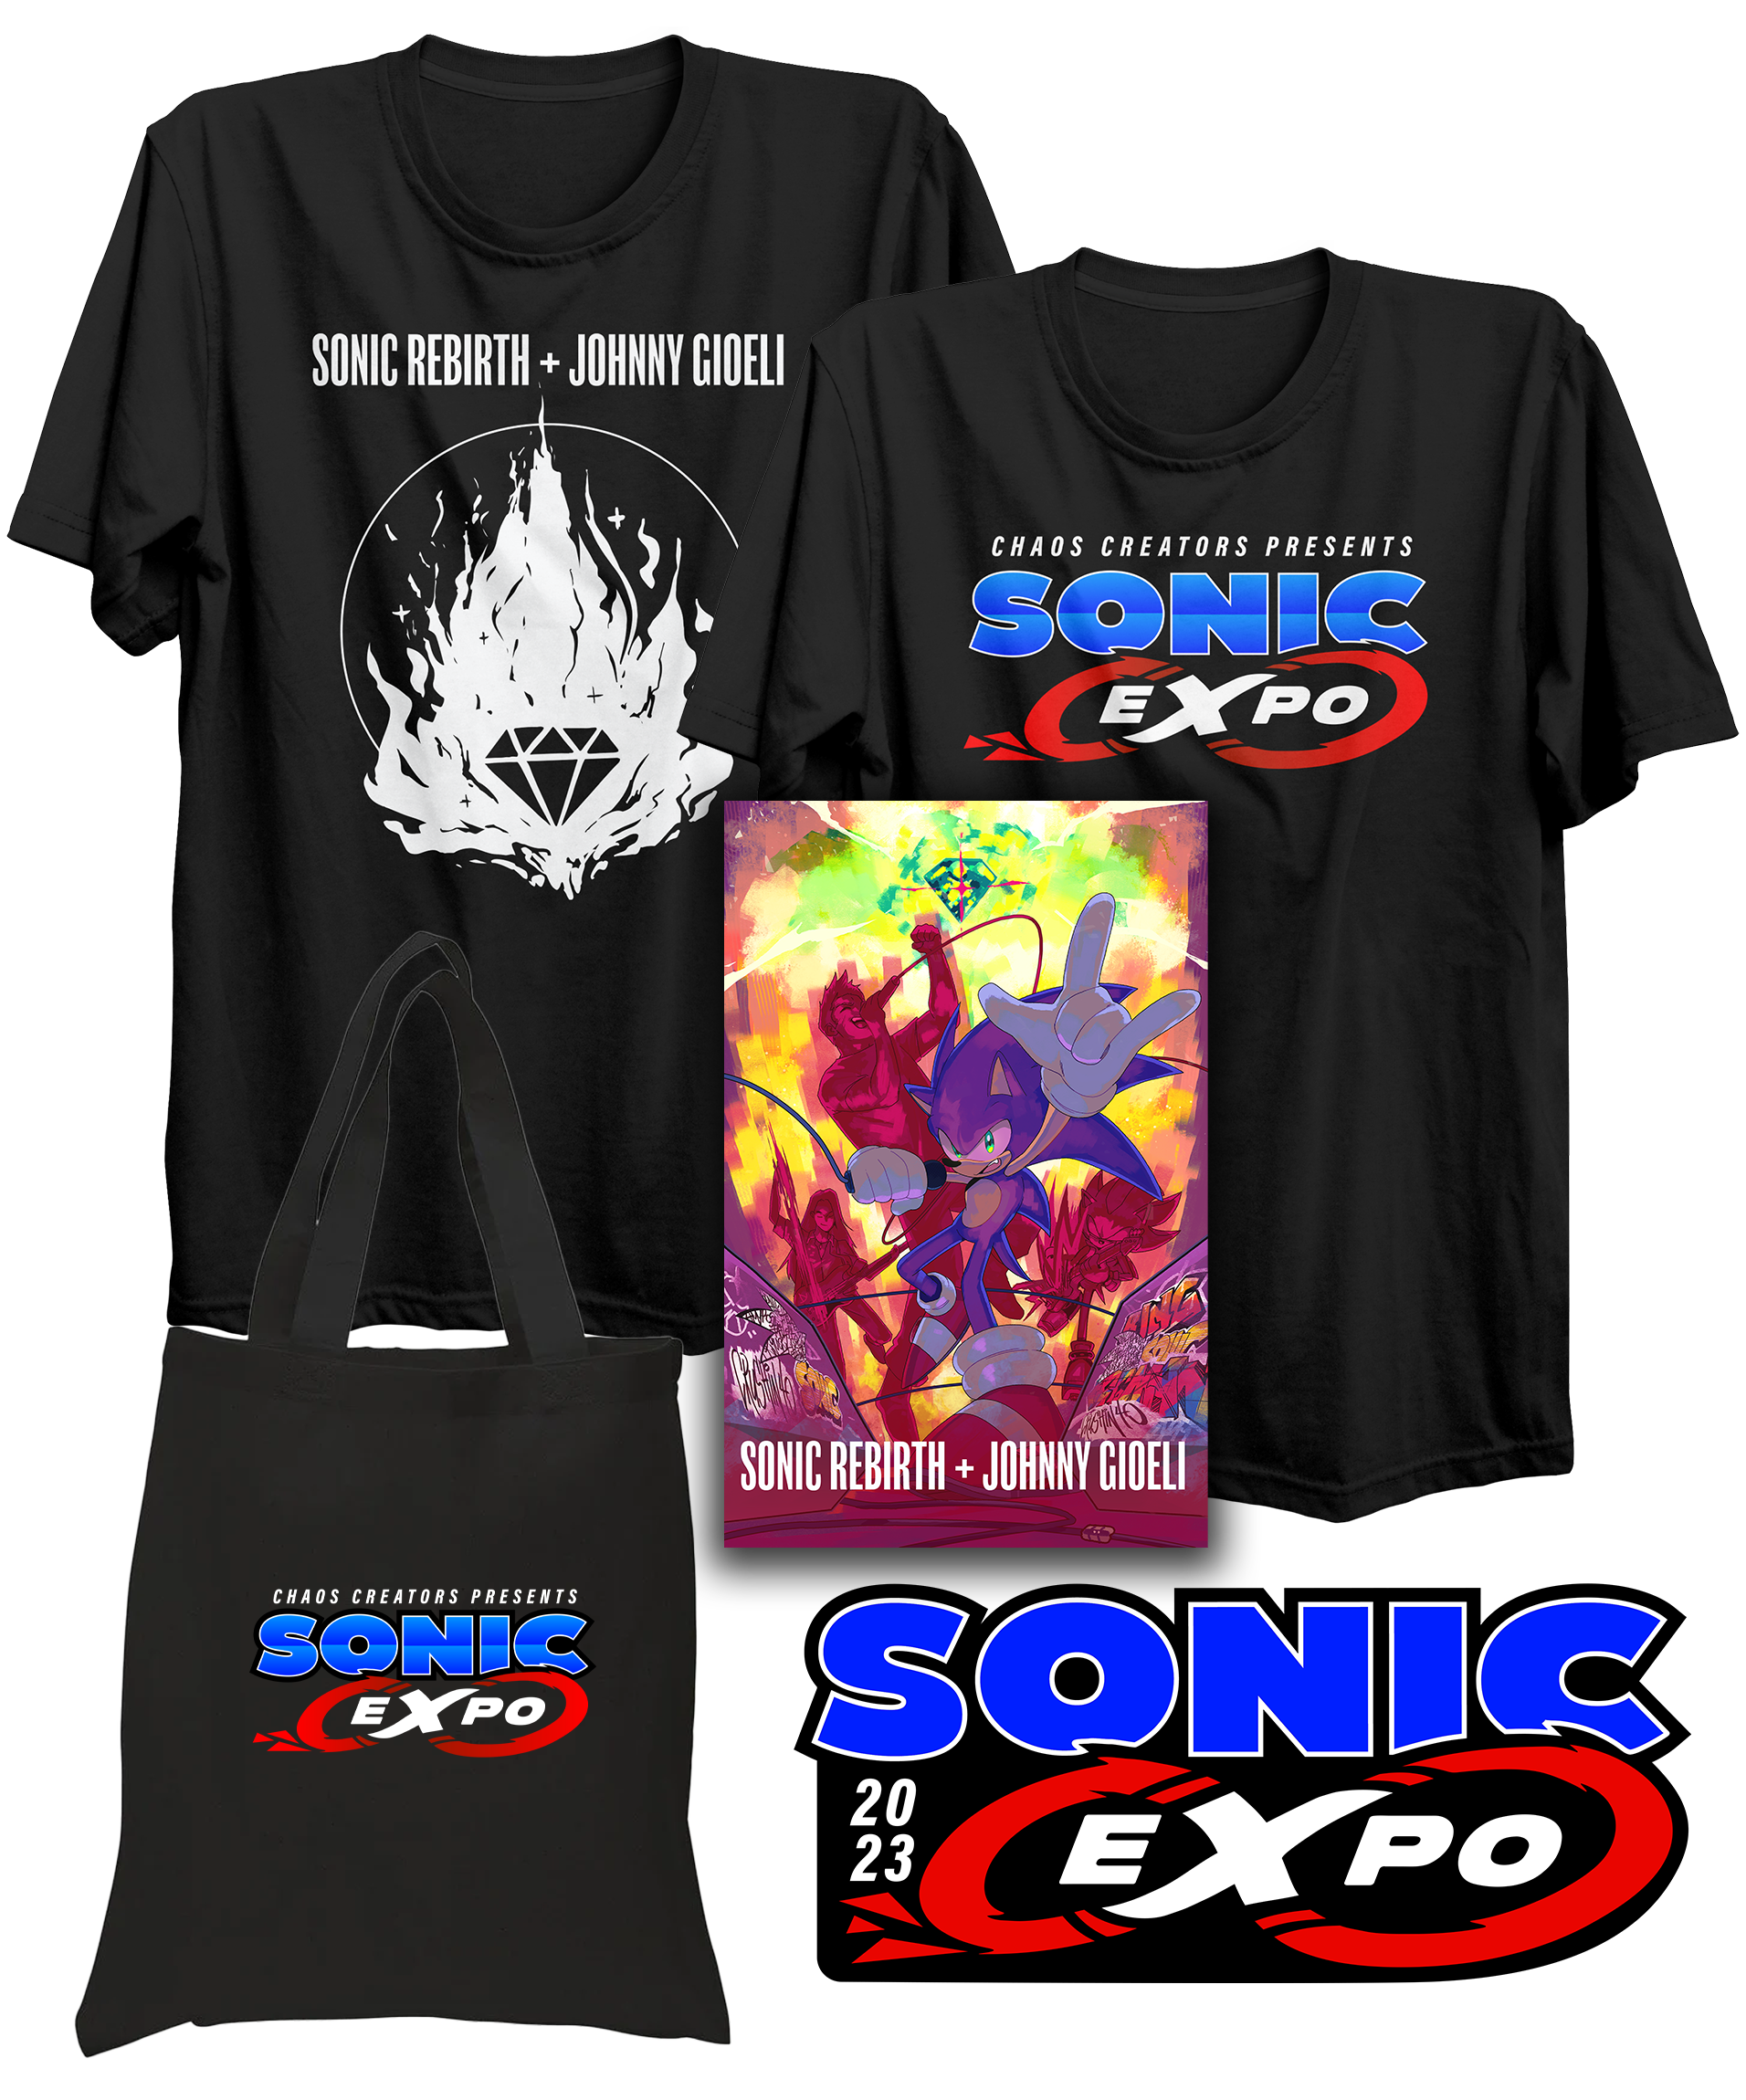 Complete Sonic EXPO Bundle SIGNED BY JOHNNY GIOELI